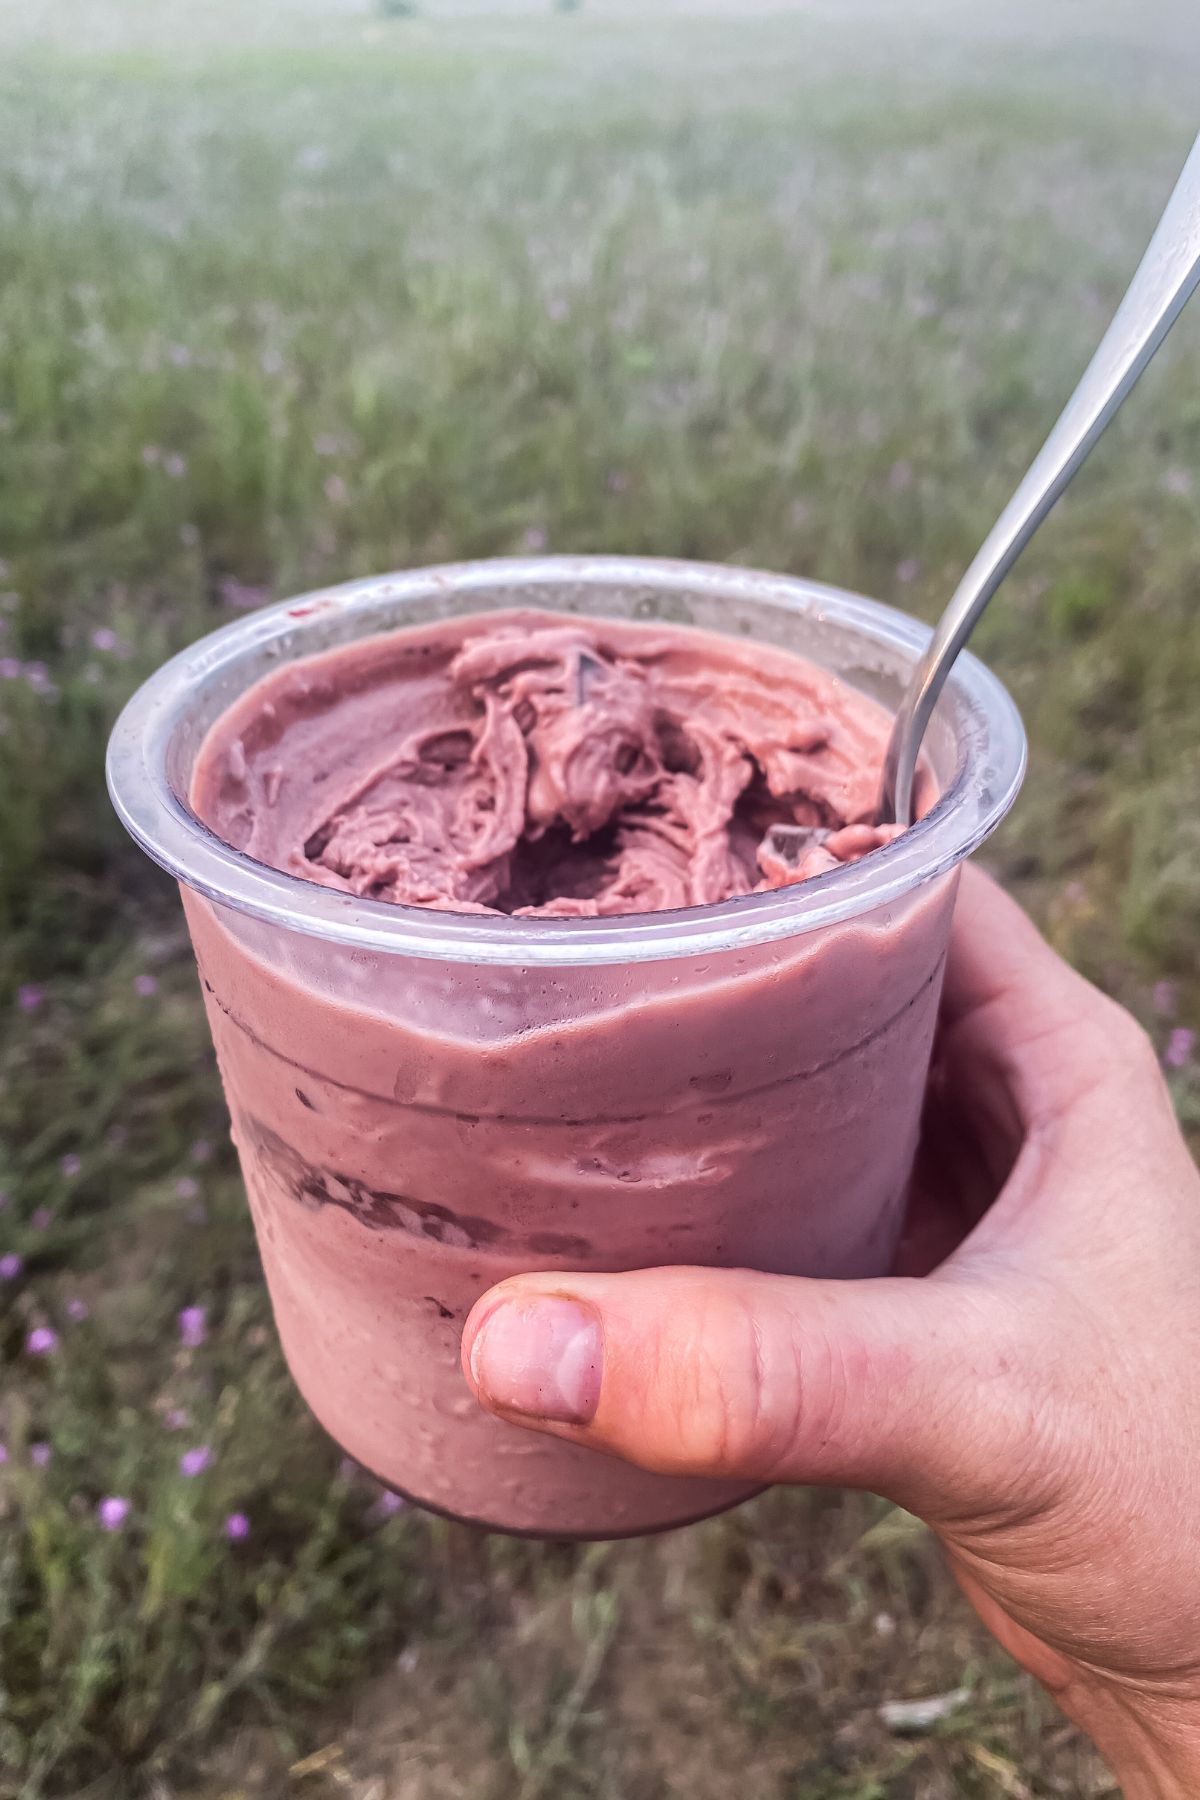 A person holding a cup of cherry chocolate chip ice cream in the middle of a field.